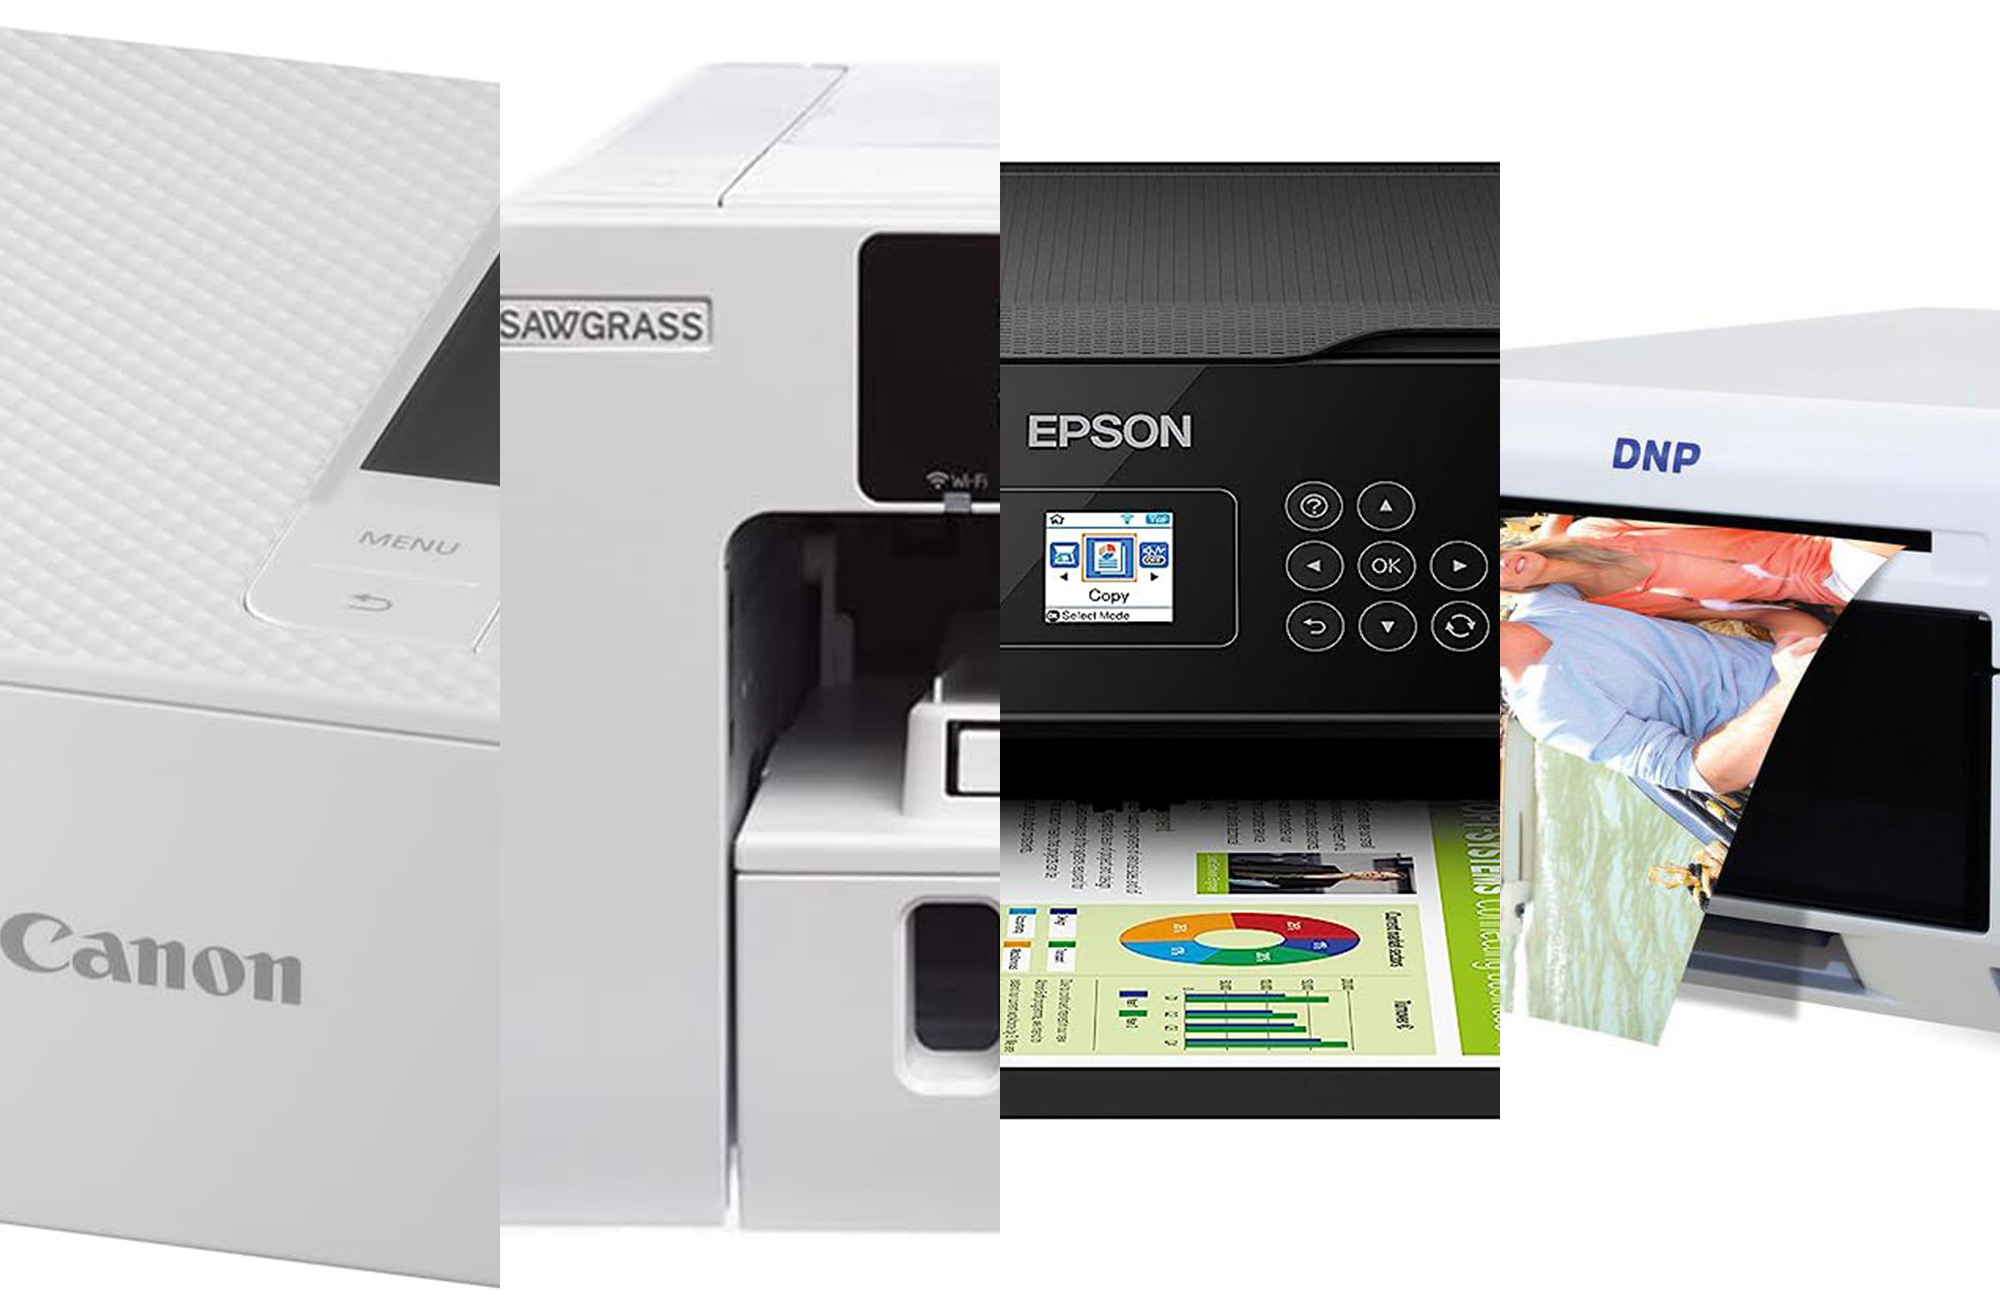 Four of the best sublimation printers are sliced together against a white background.